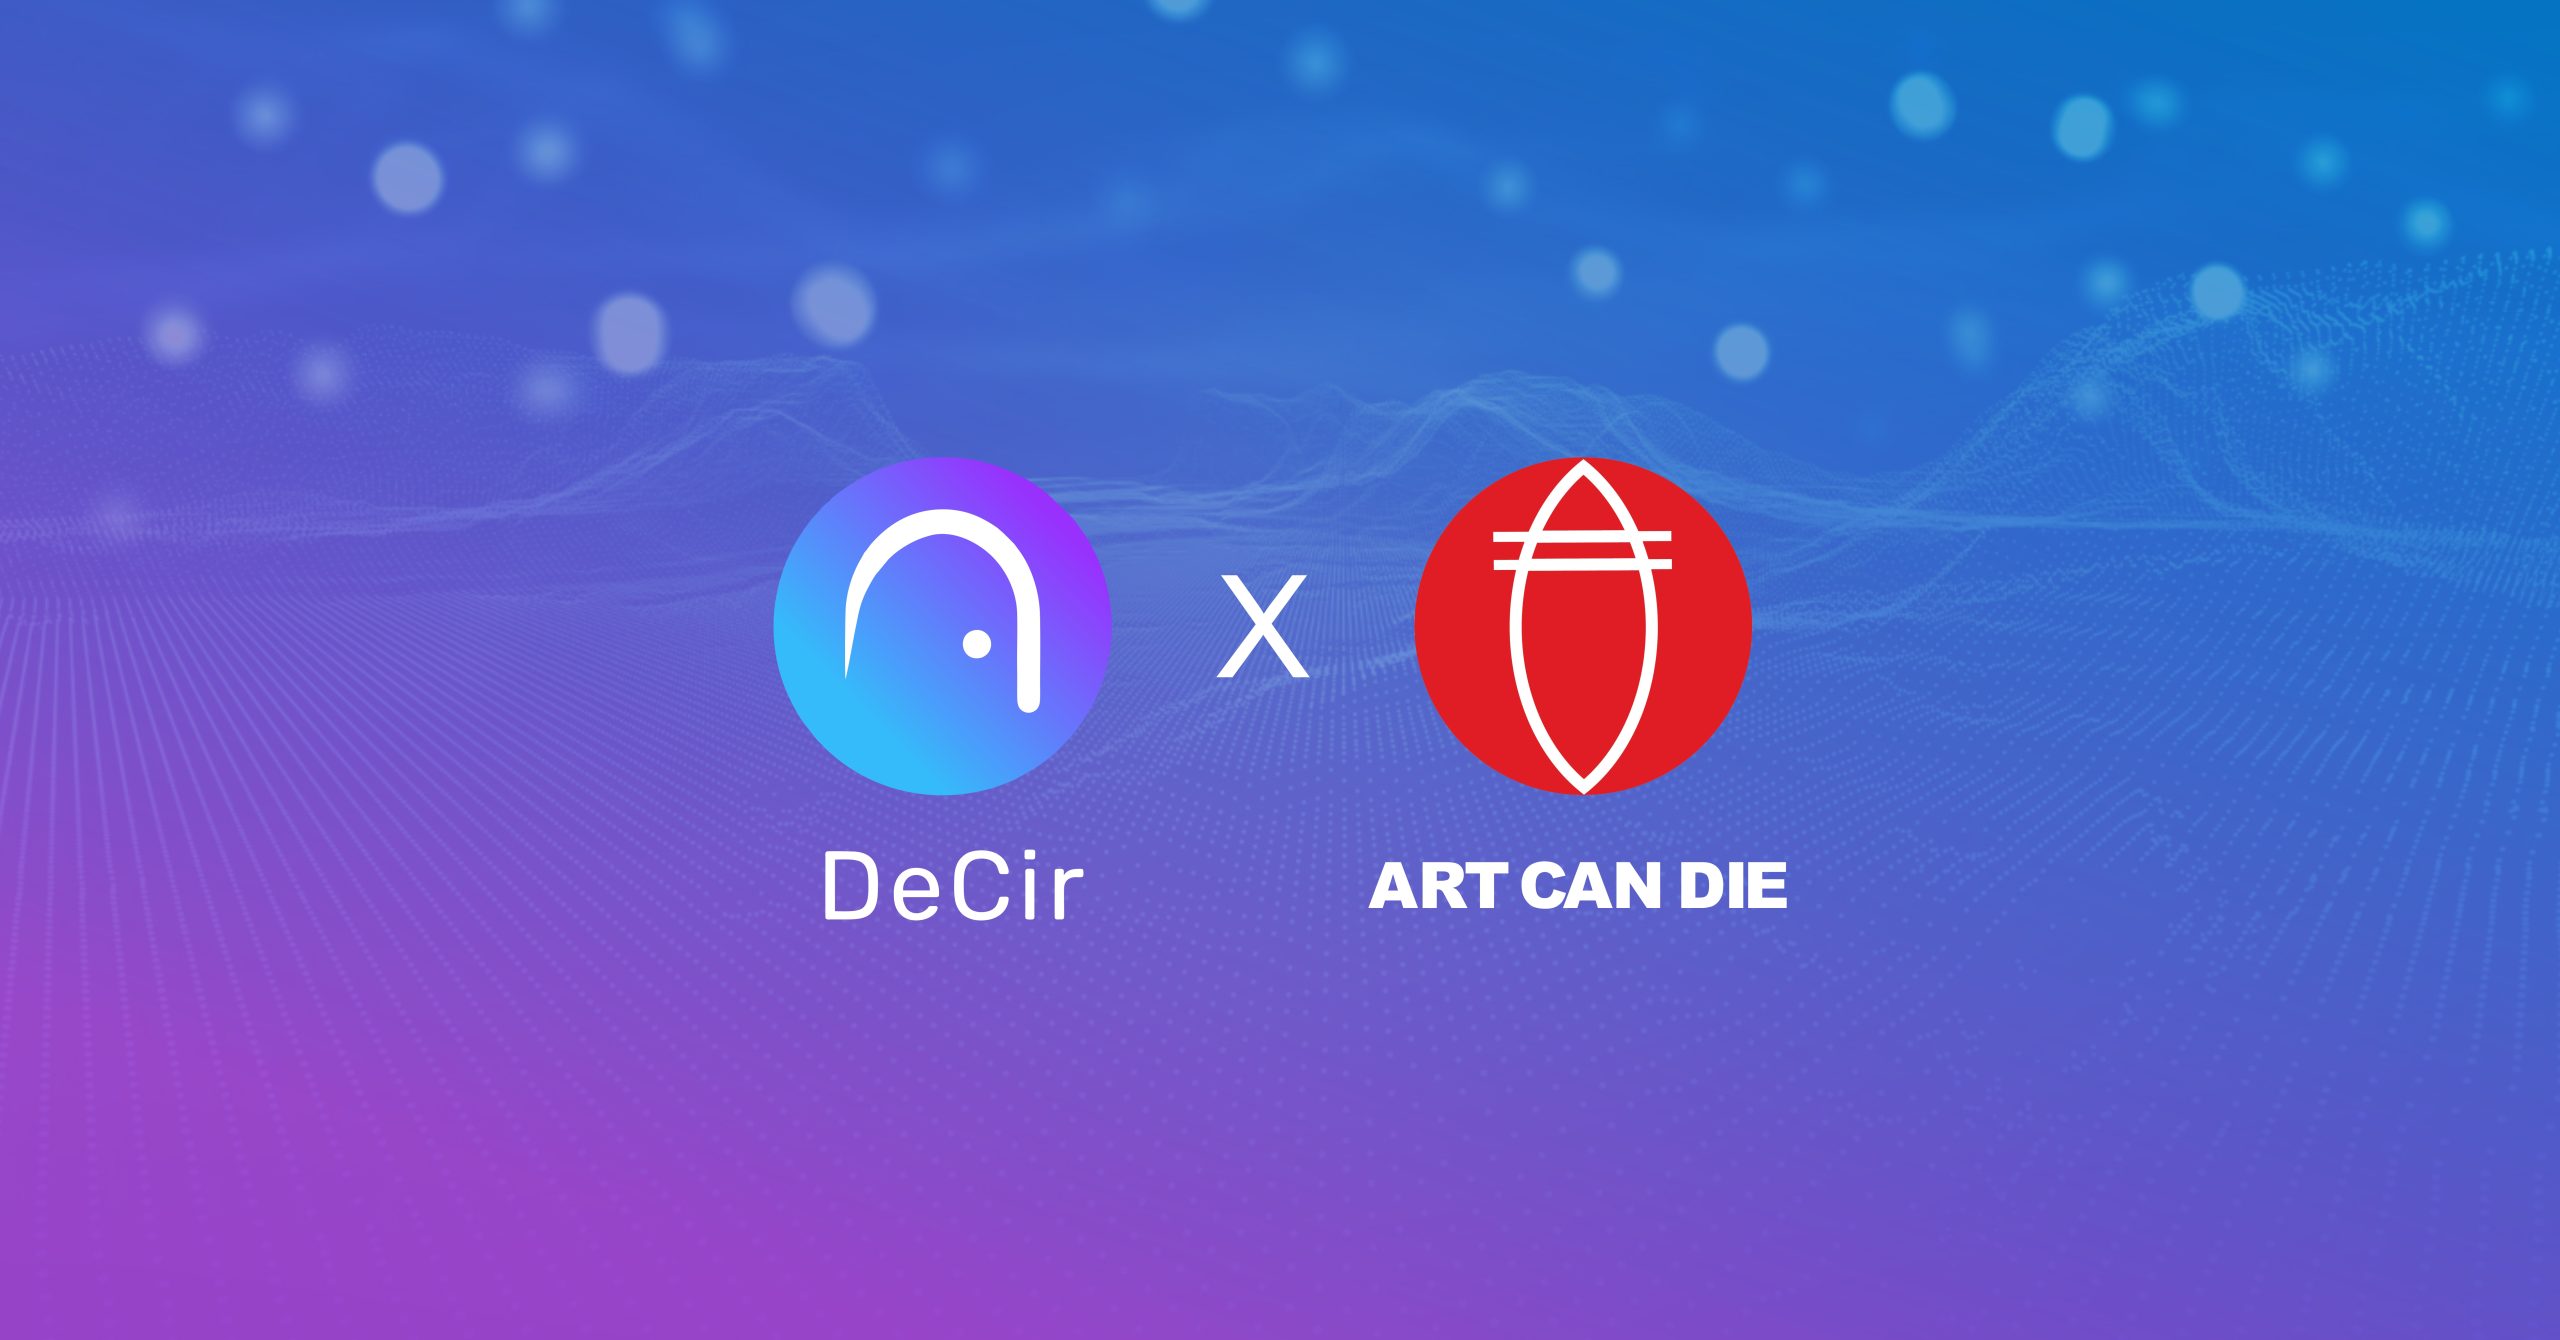 Partnership Announcement: DeCir welcomes ART CAN DIE to its Ecosystem